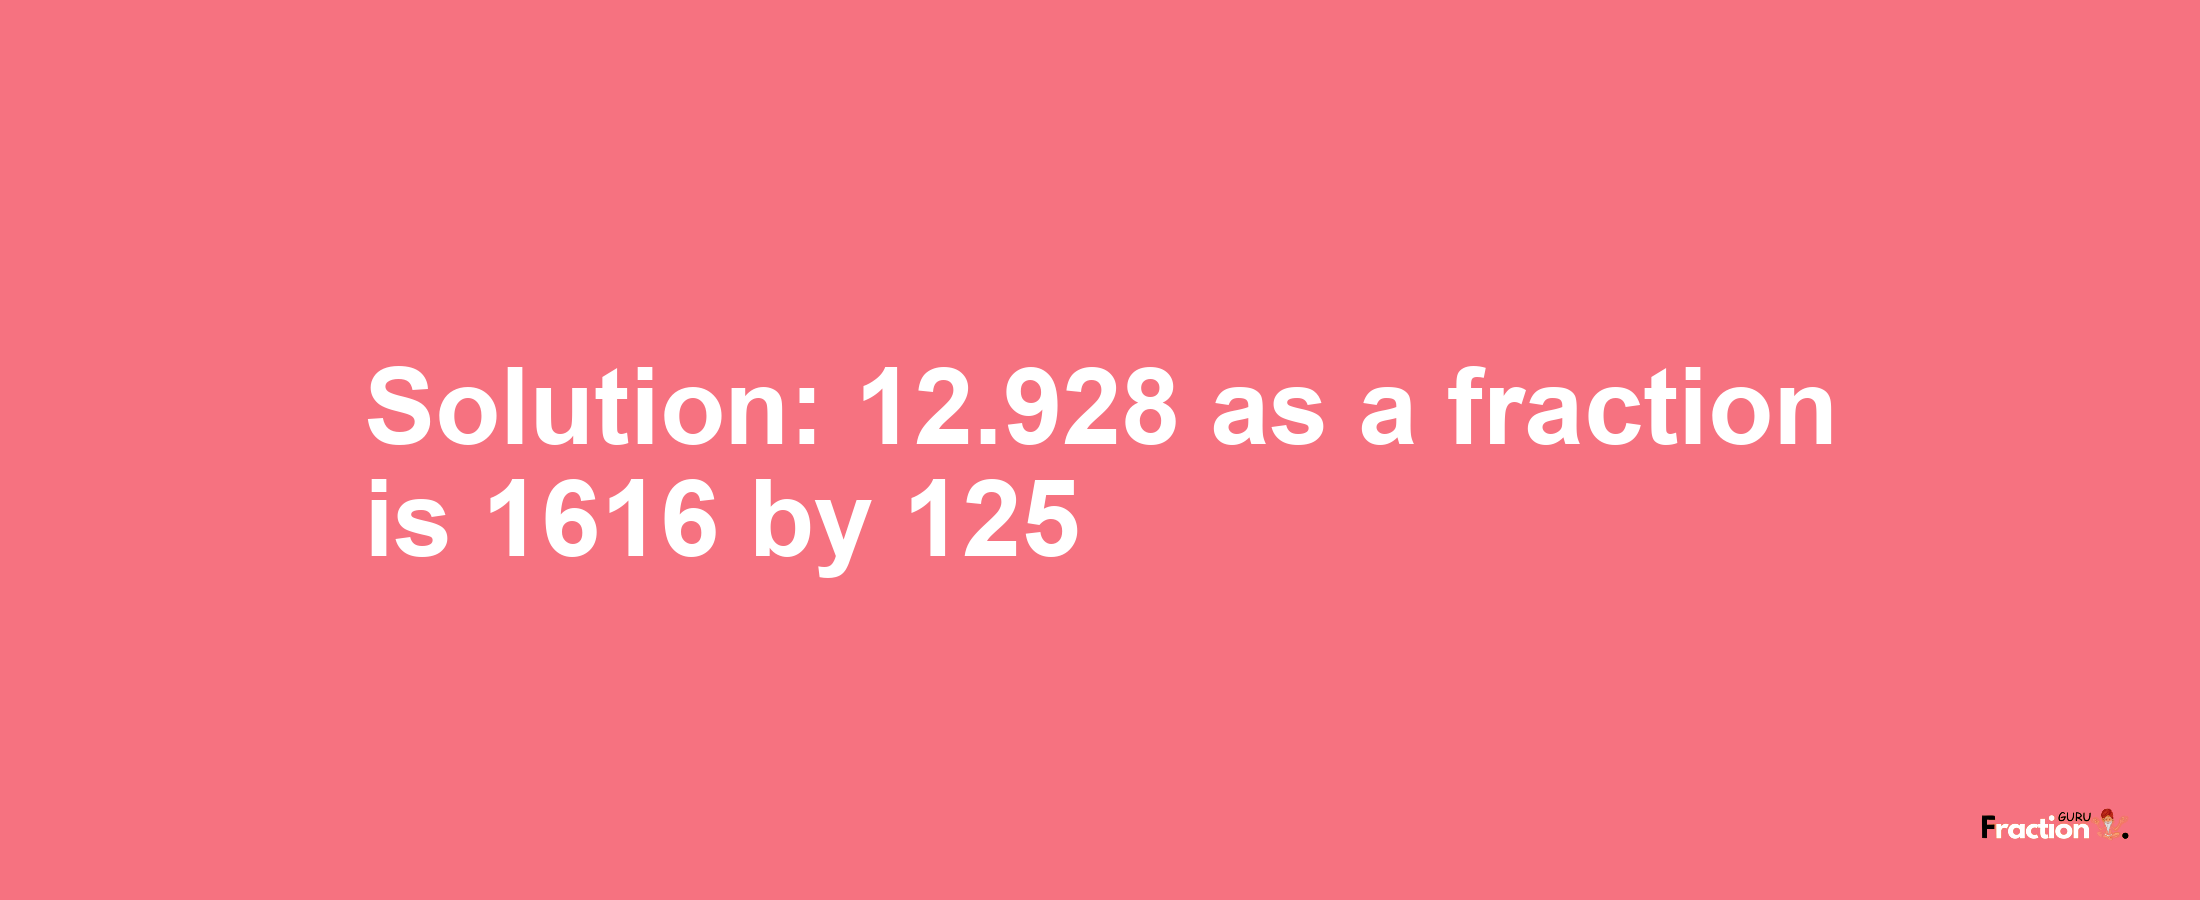 Solution:12.928 as a fraction is 1616/125